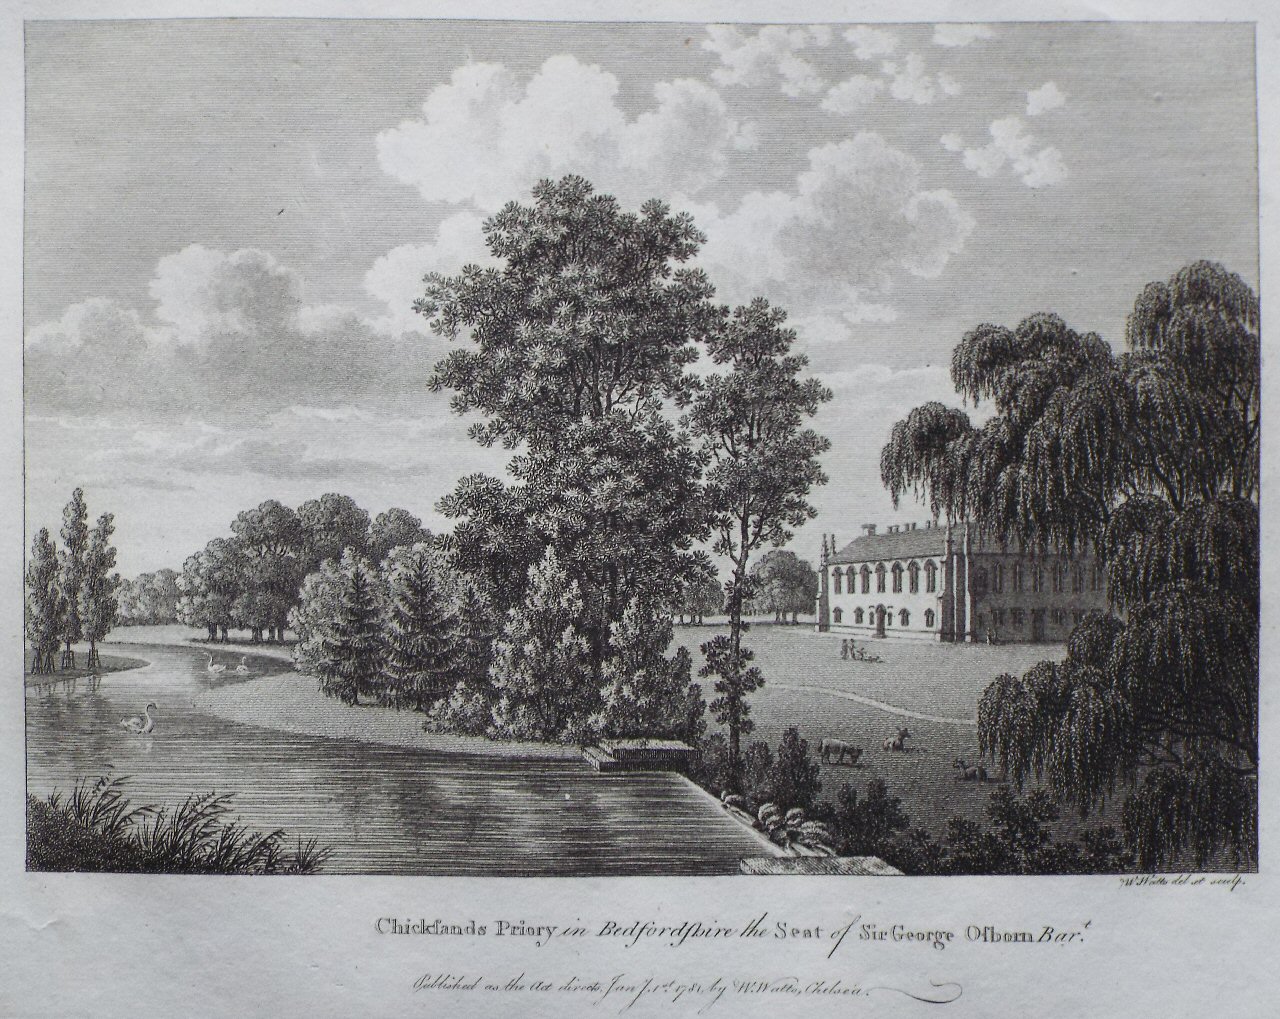 Print - Chicksands Priory in Bedfordshire the Seat of Sir George Osborn Bart. - Watts